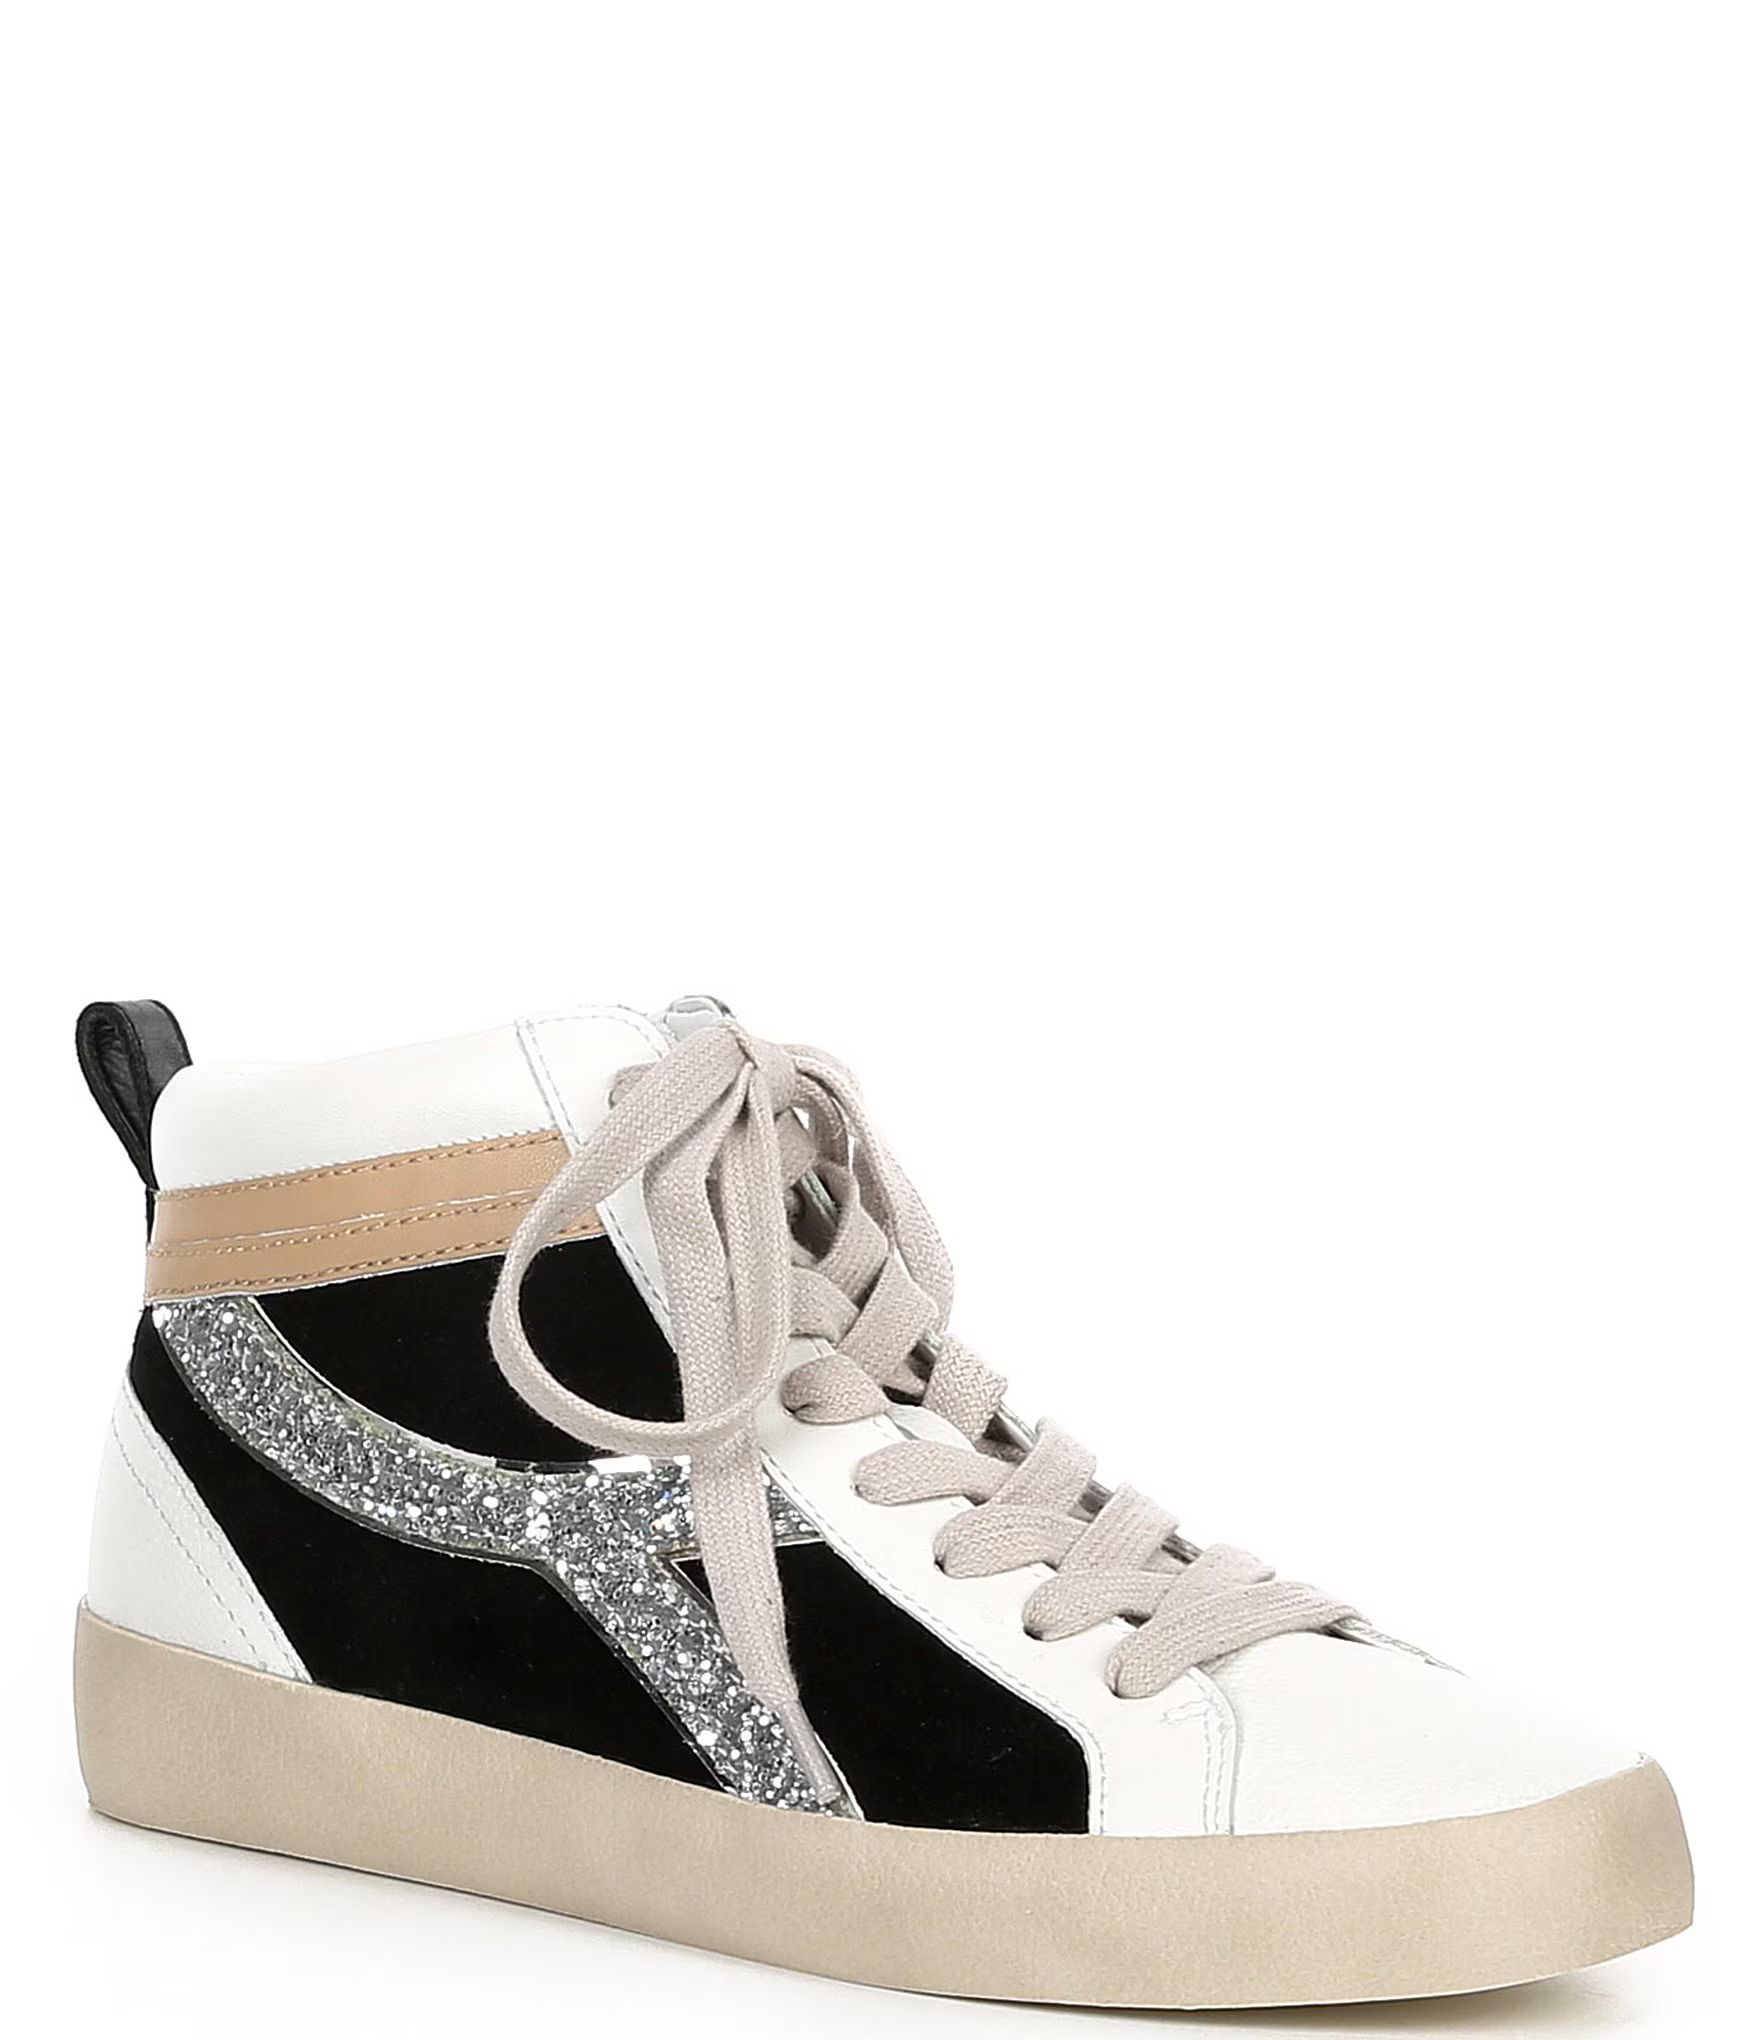 Emmitt Leather and Suede Glitter High Top Sneakers | Dillard's